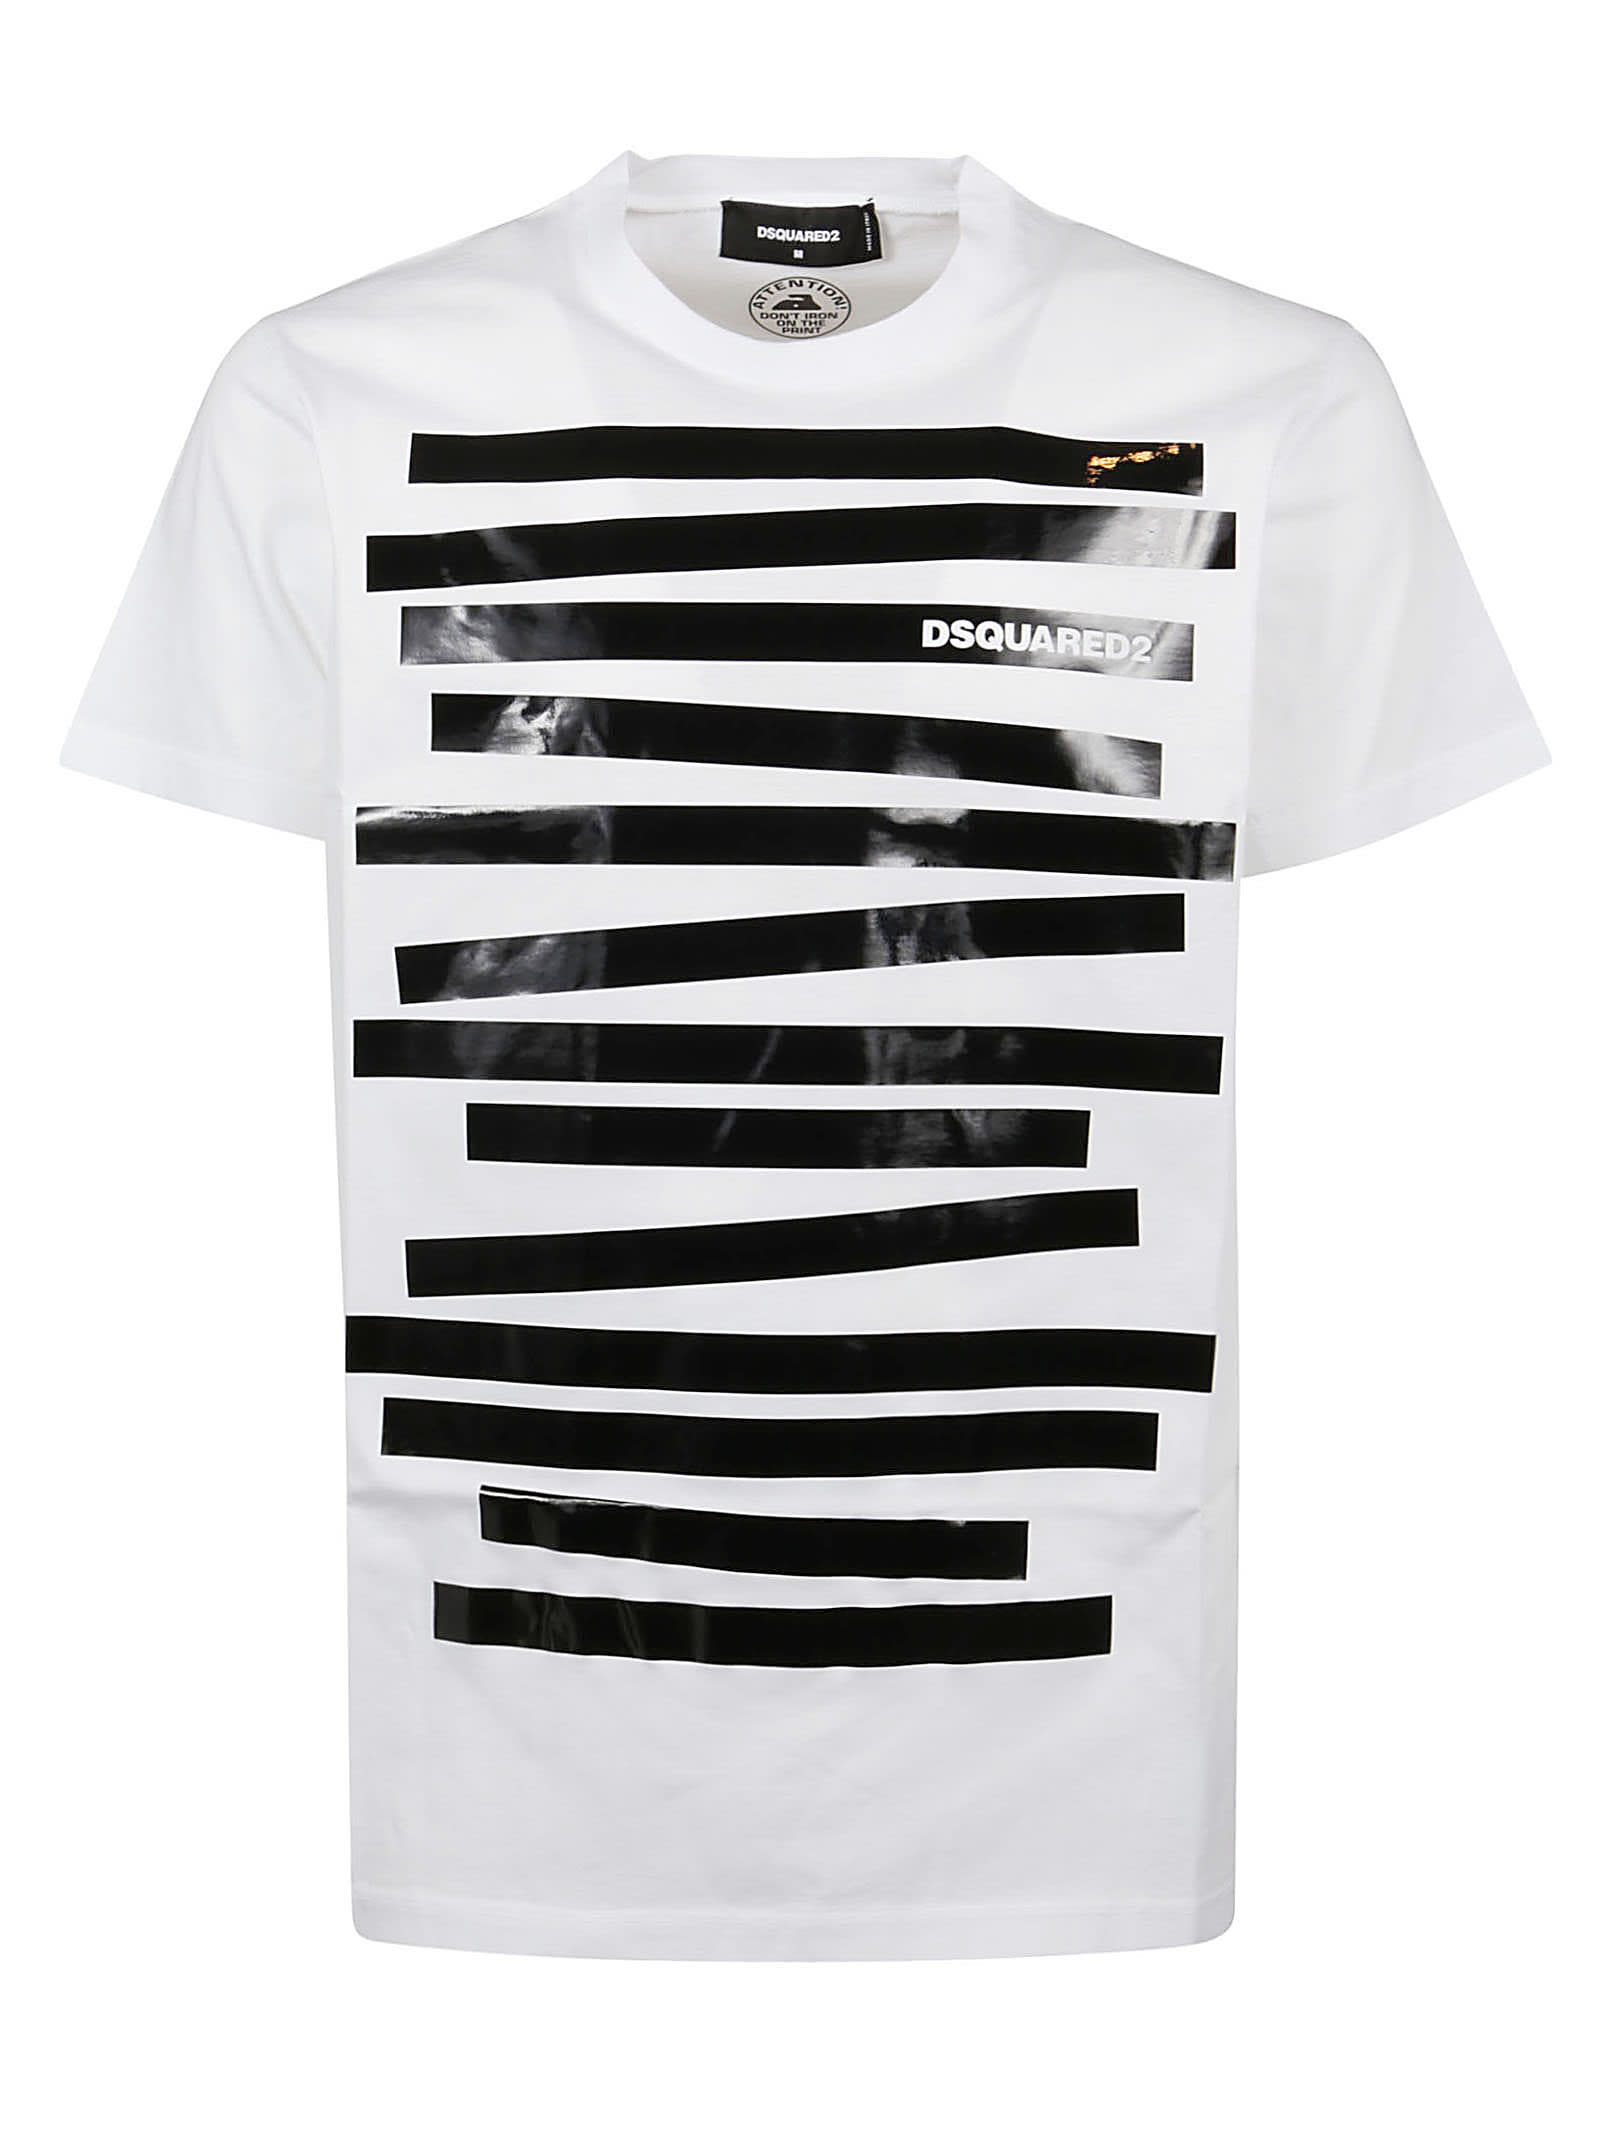 DSQUARED2 T-SHIRT,S71GD1011 S23009 100 WHITE